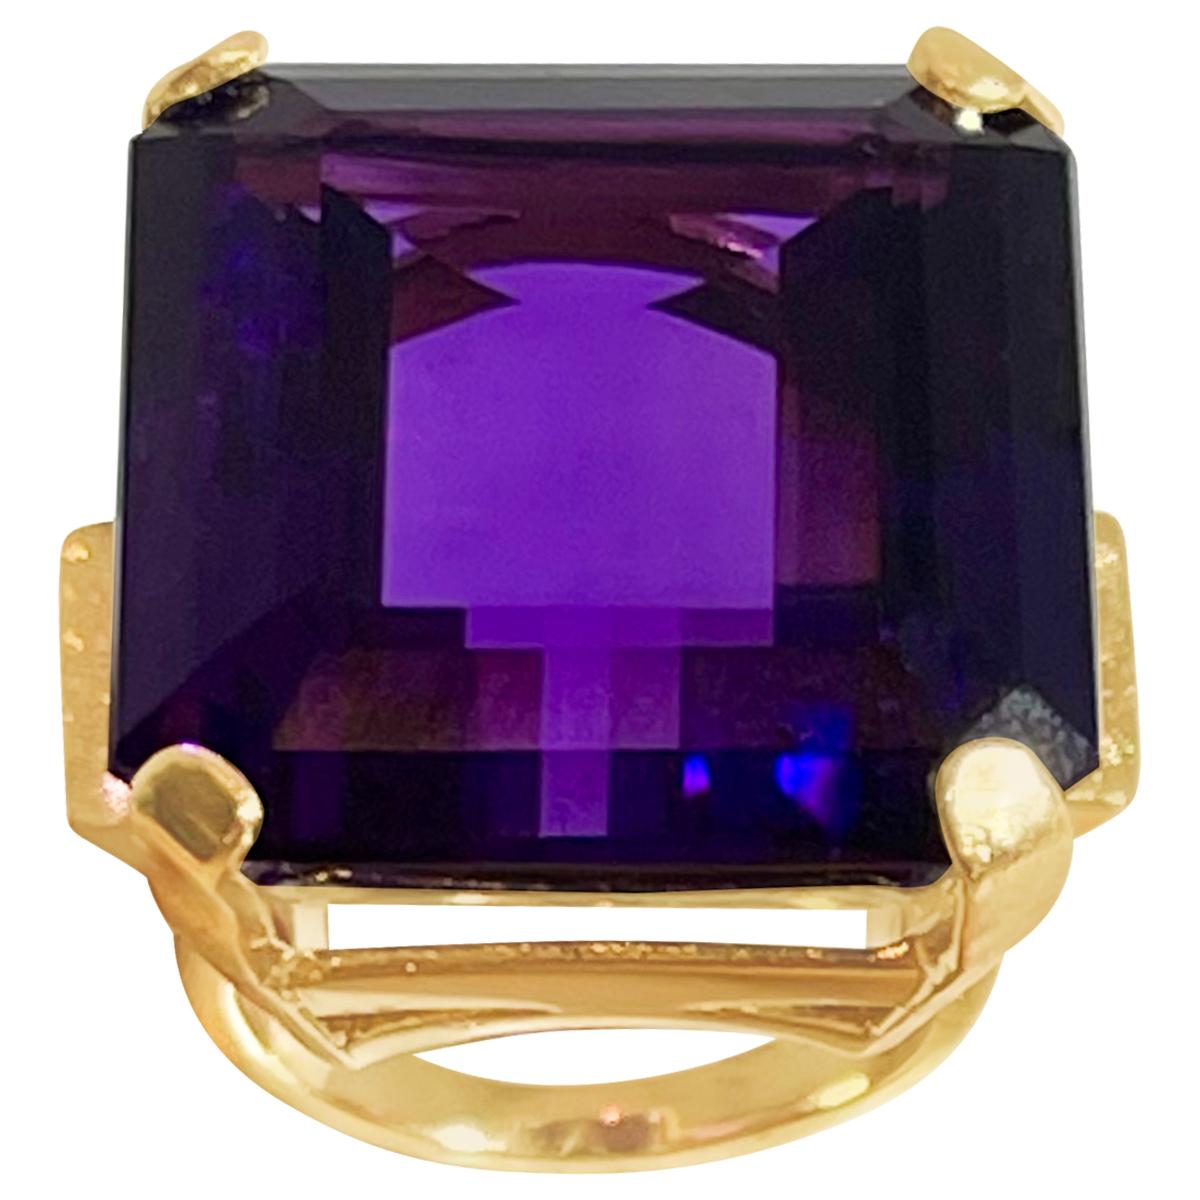 Exact 69 Carat Emerald Cut Amethyst  Cocktail Ring in 14 Karat Yellow Gold Size 9
26 X28 MM Amethyst  Cocktail Ring in 14 Karat Yellow Gold 

This is a Beautiful Cocktail ring ring which has a large 69 carat of  Amethyst . Color and clarity is nice.